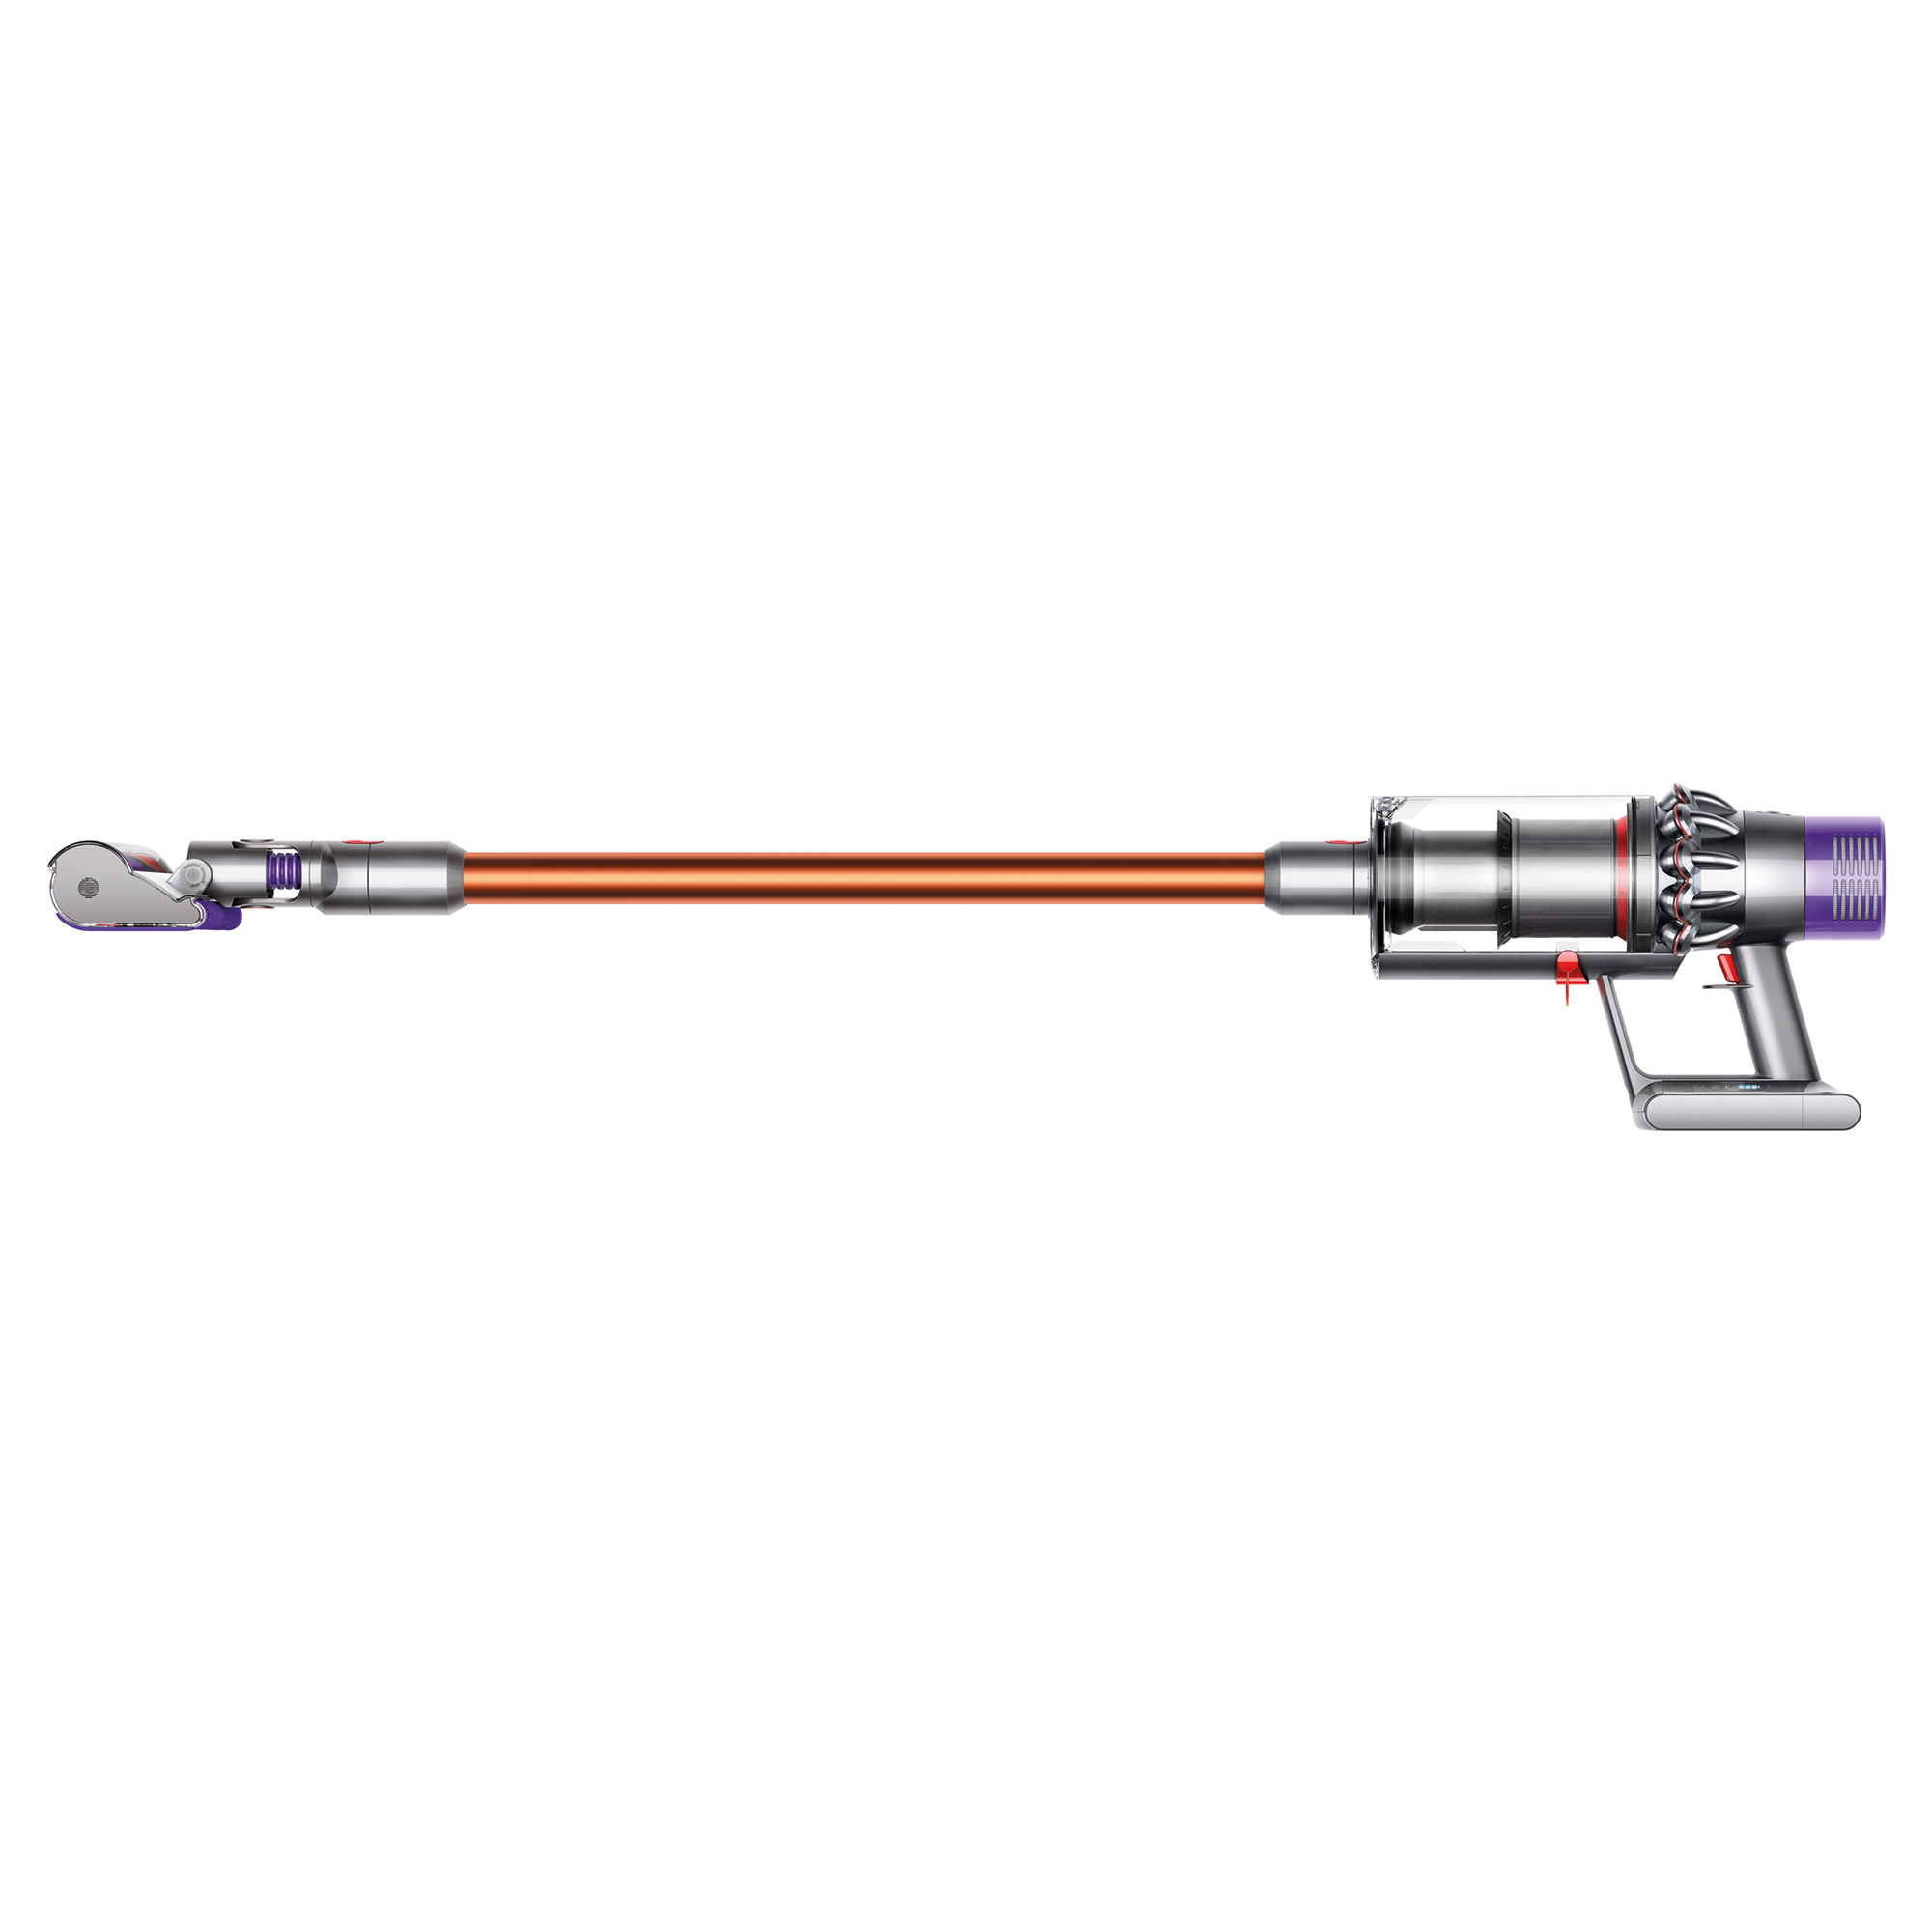 Dyson V10 Absolute Cordless Vacuum | Copper | Refurbished - image 2 of 7